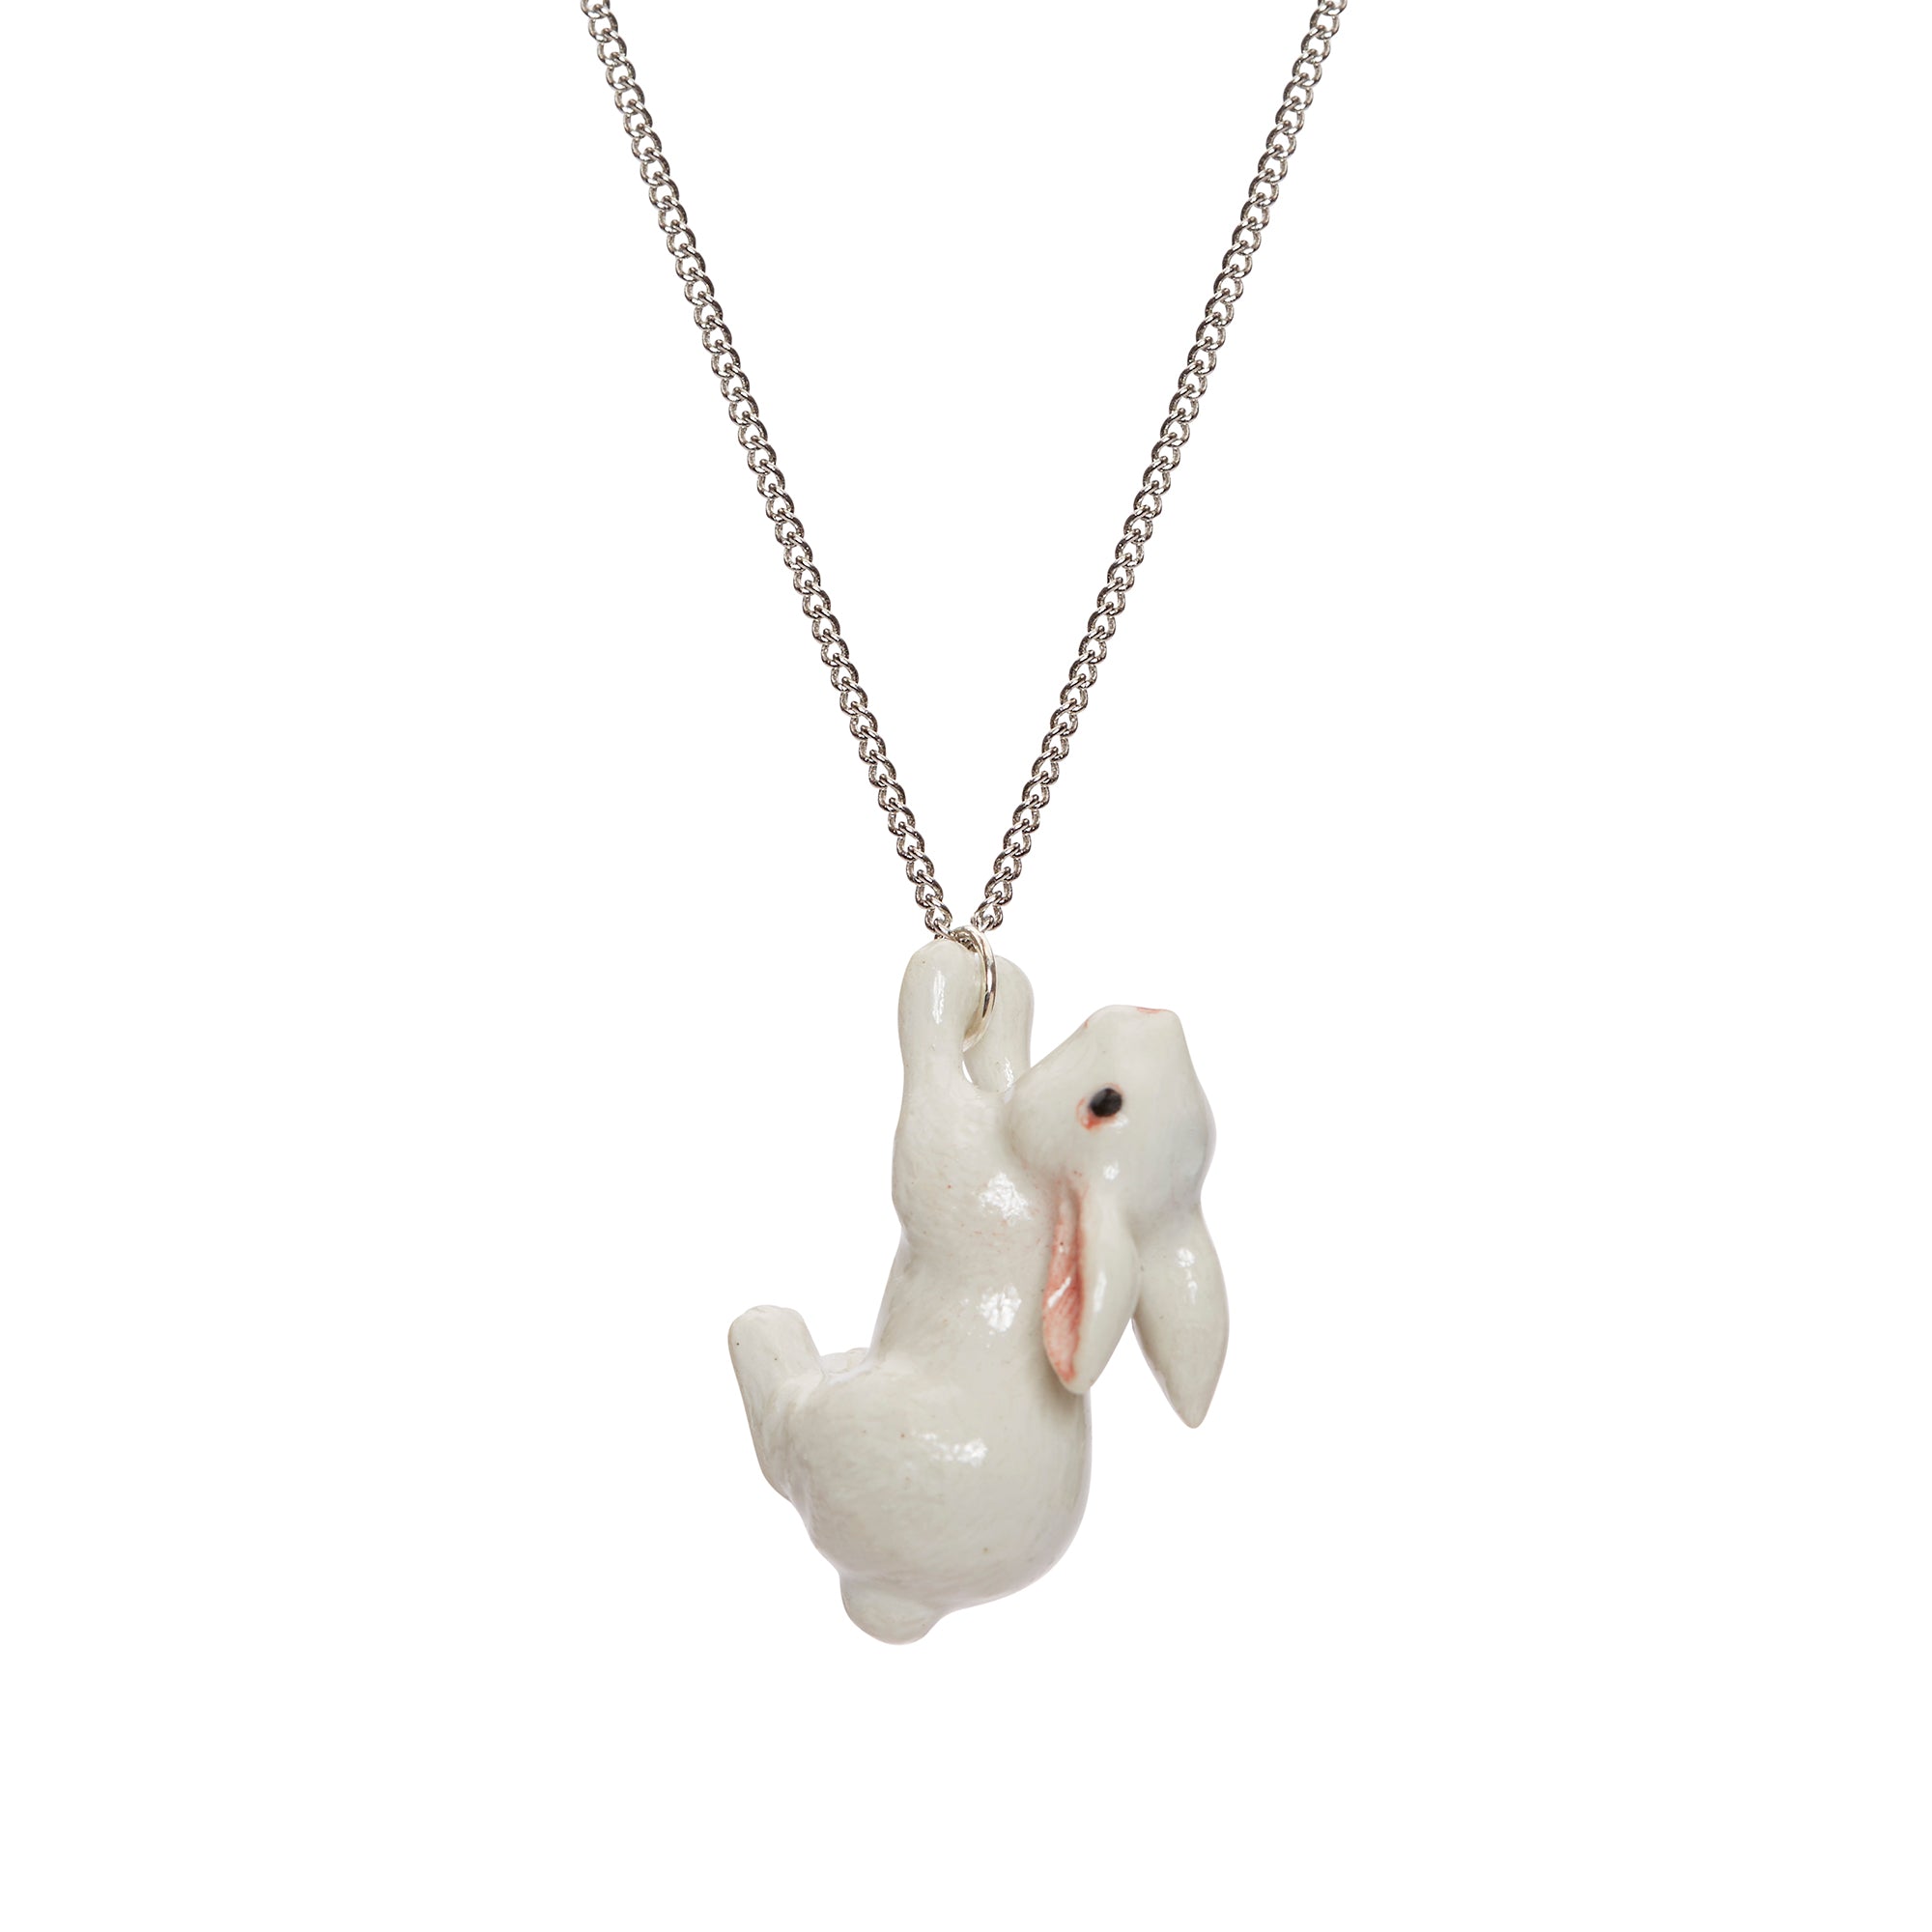 White Leaping Bunny Necklace